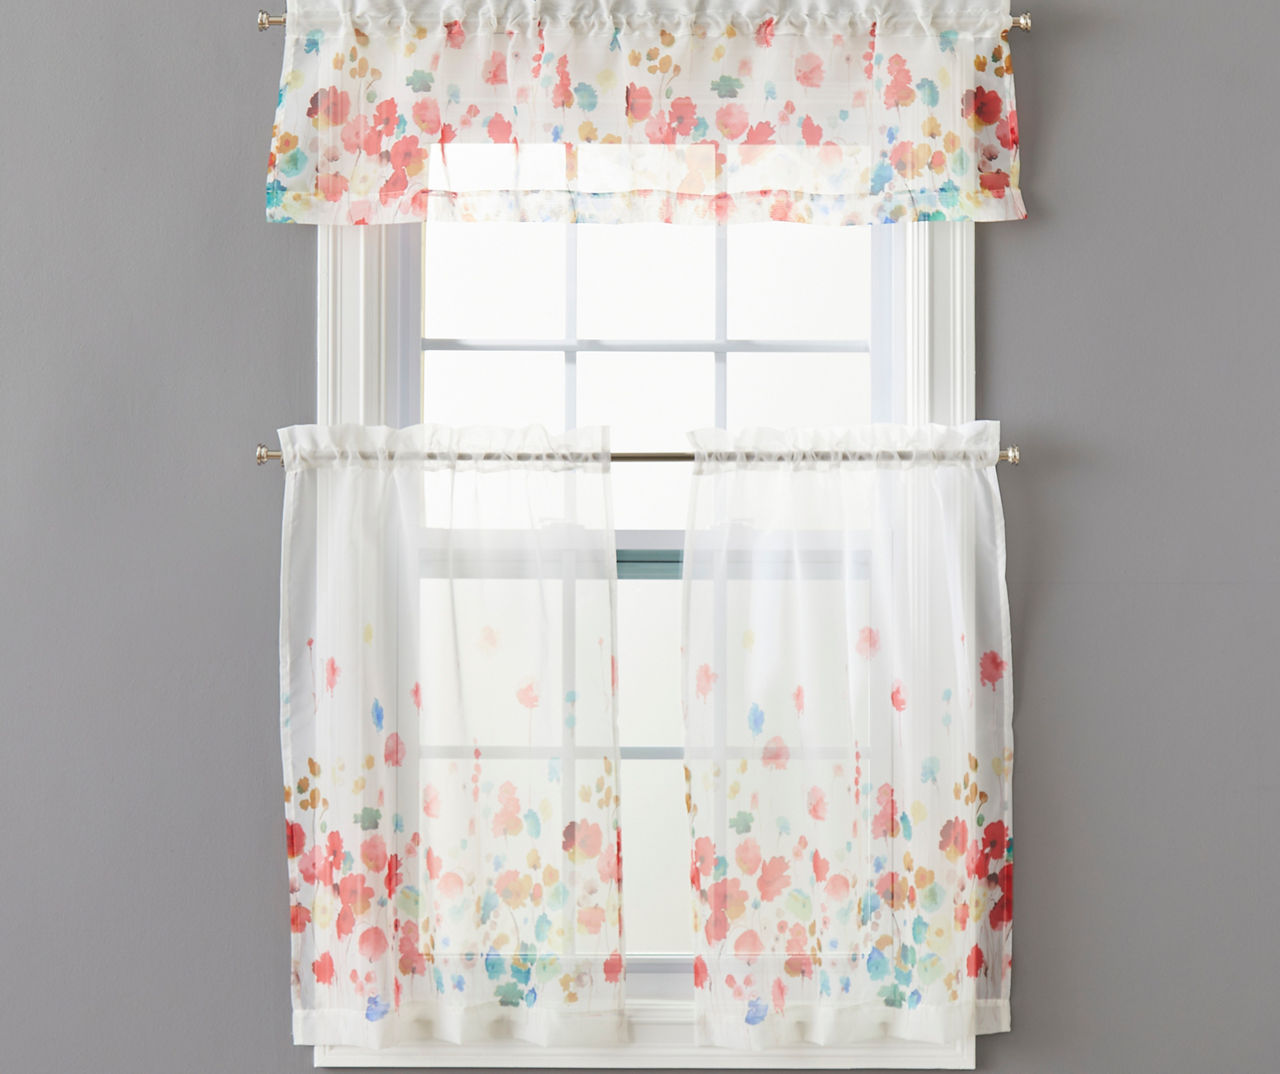 Find Kitchen Window Curtains That Match Your Style